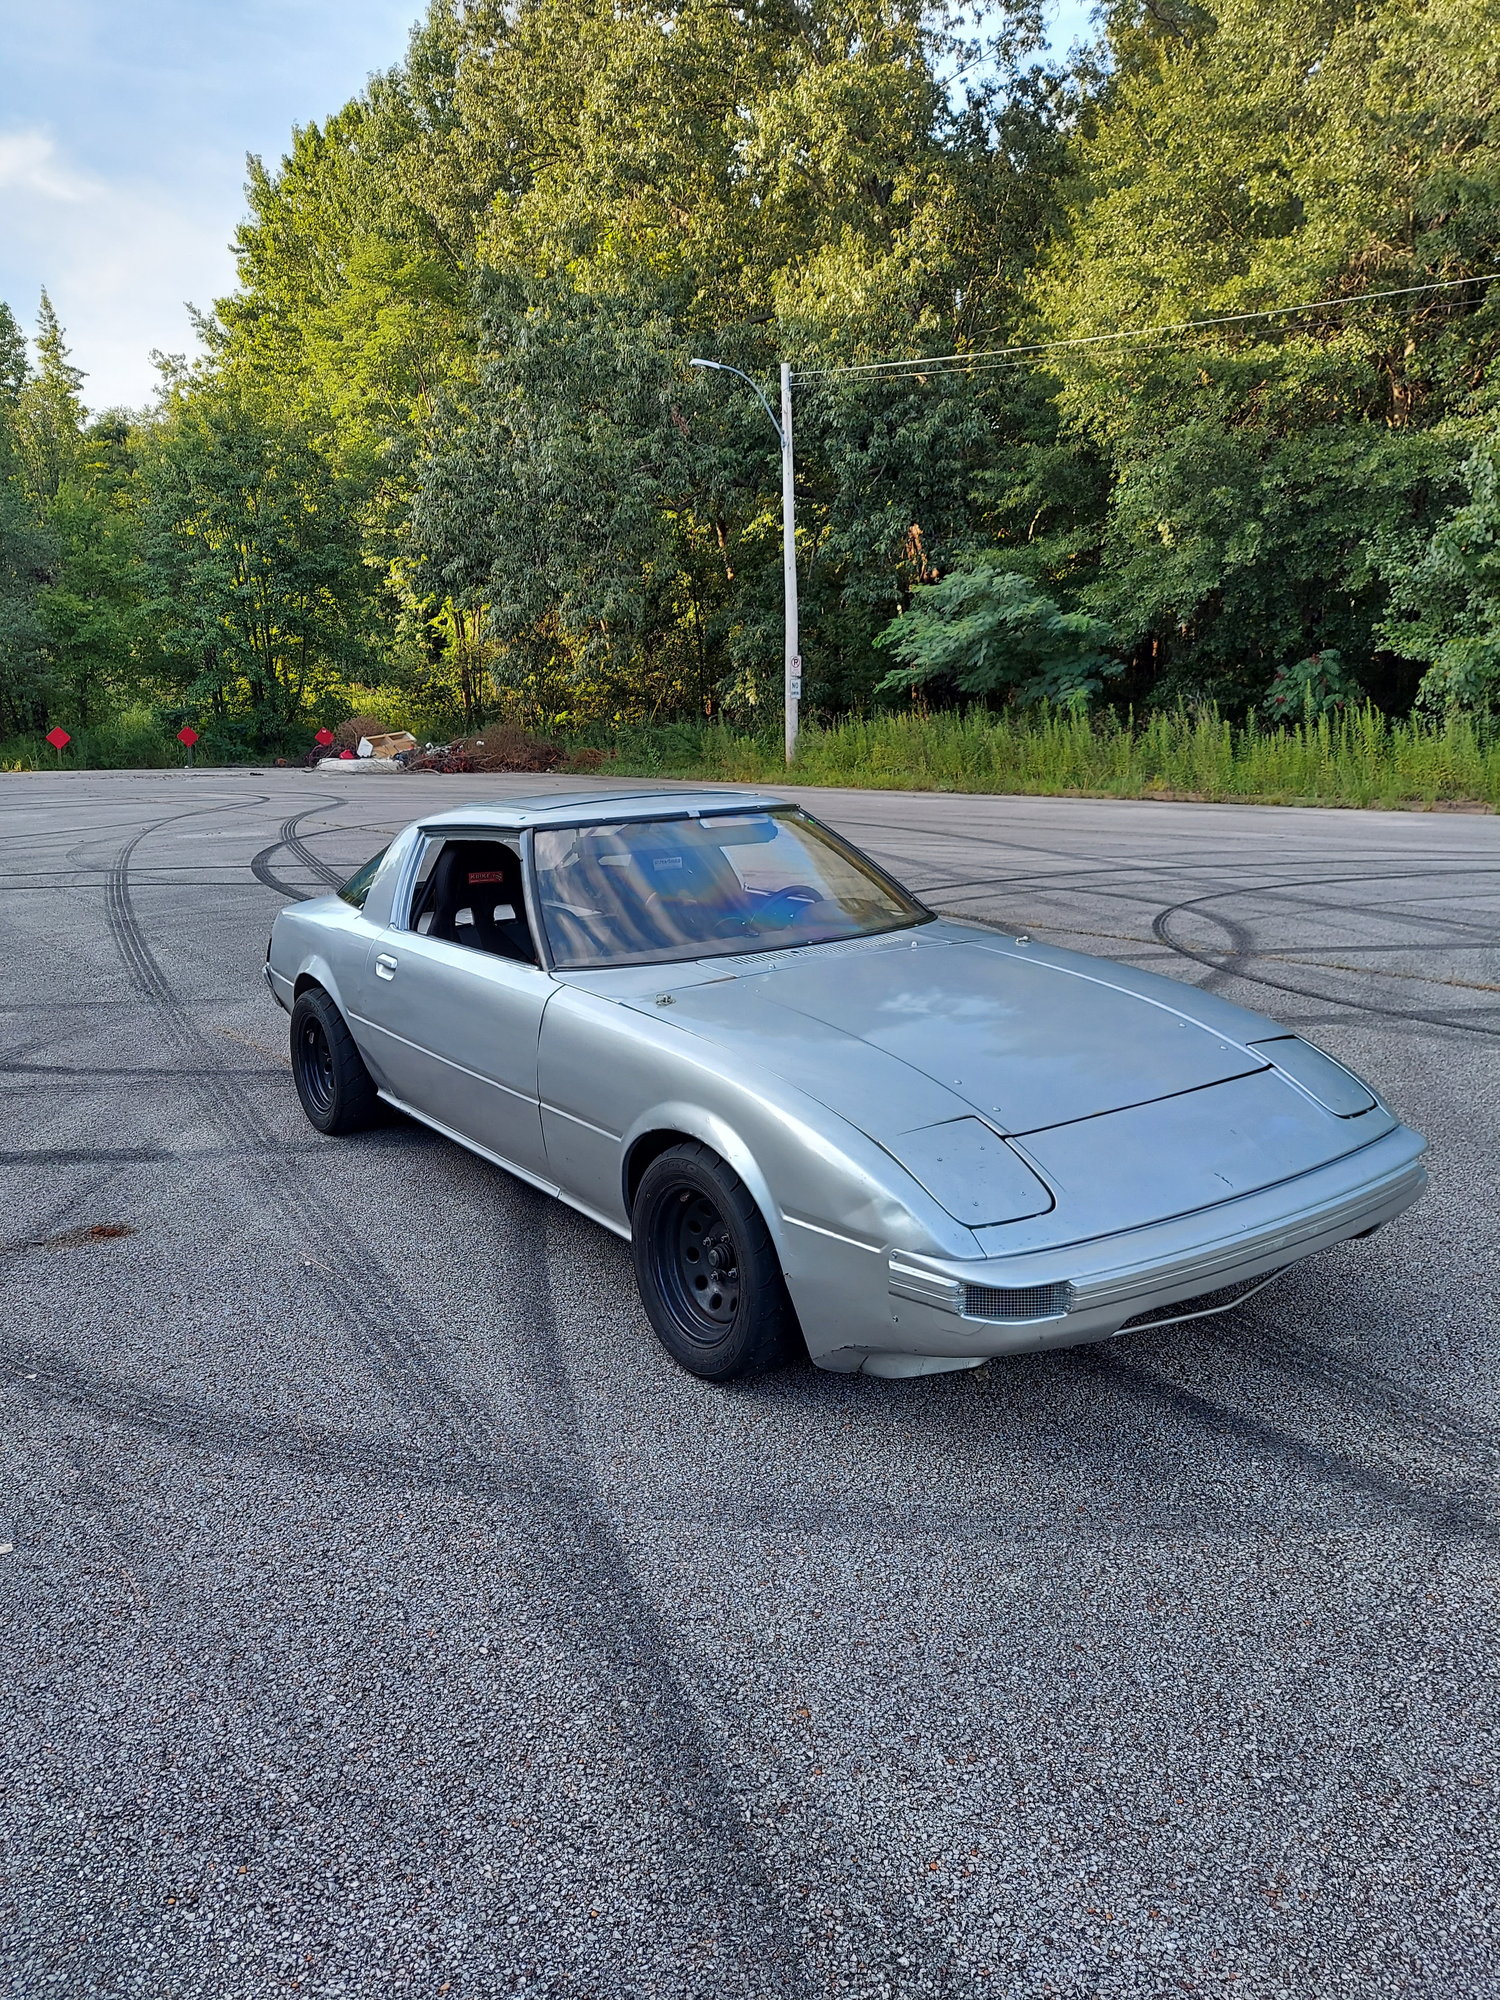 1982 Mazda RX-7 - Selling my FB Race Car - Used - VIN jm1fb3319c0652131 - Other - 2WD - Manual - Coupe - Silver - Cordova, TN 38018, United States